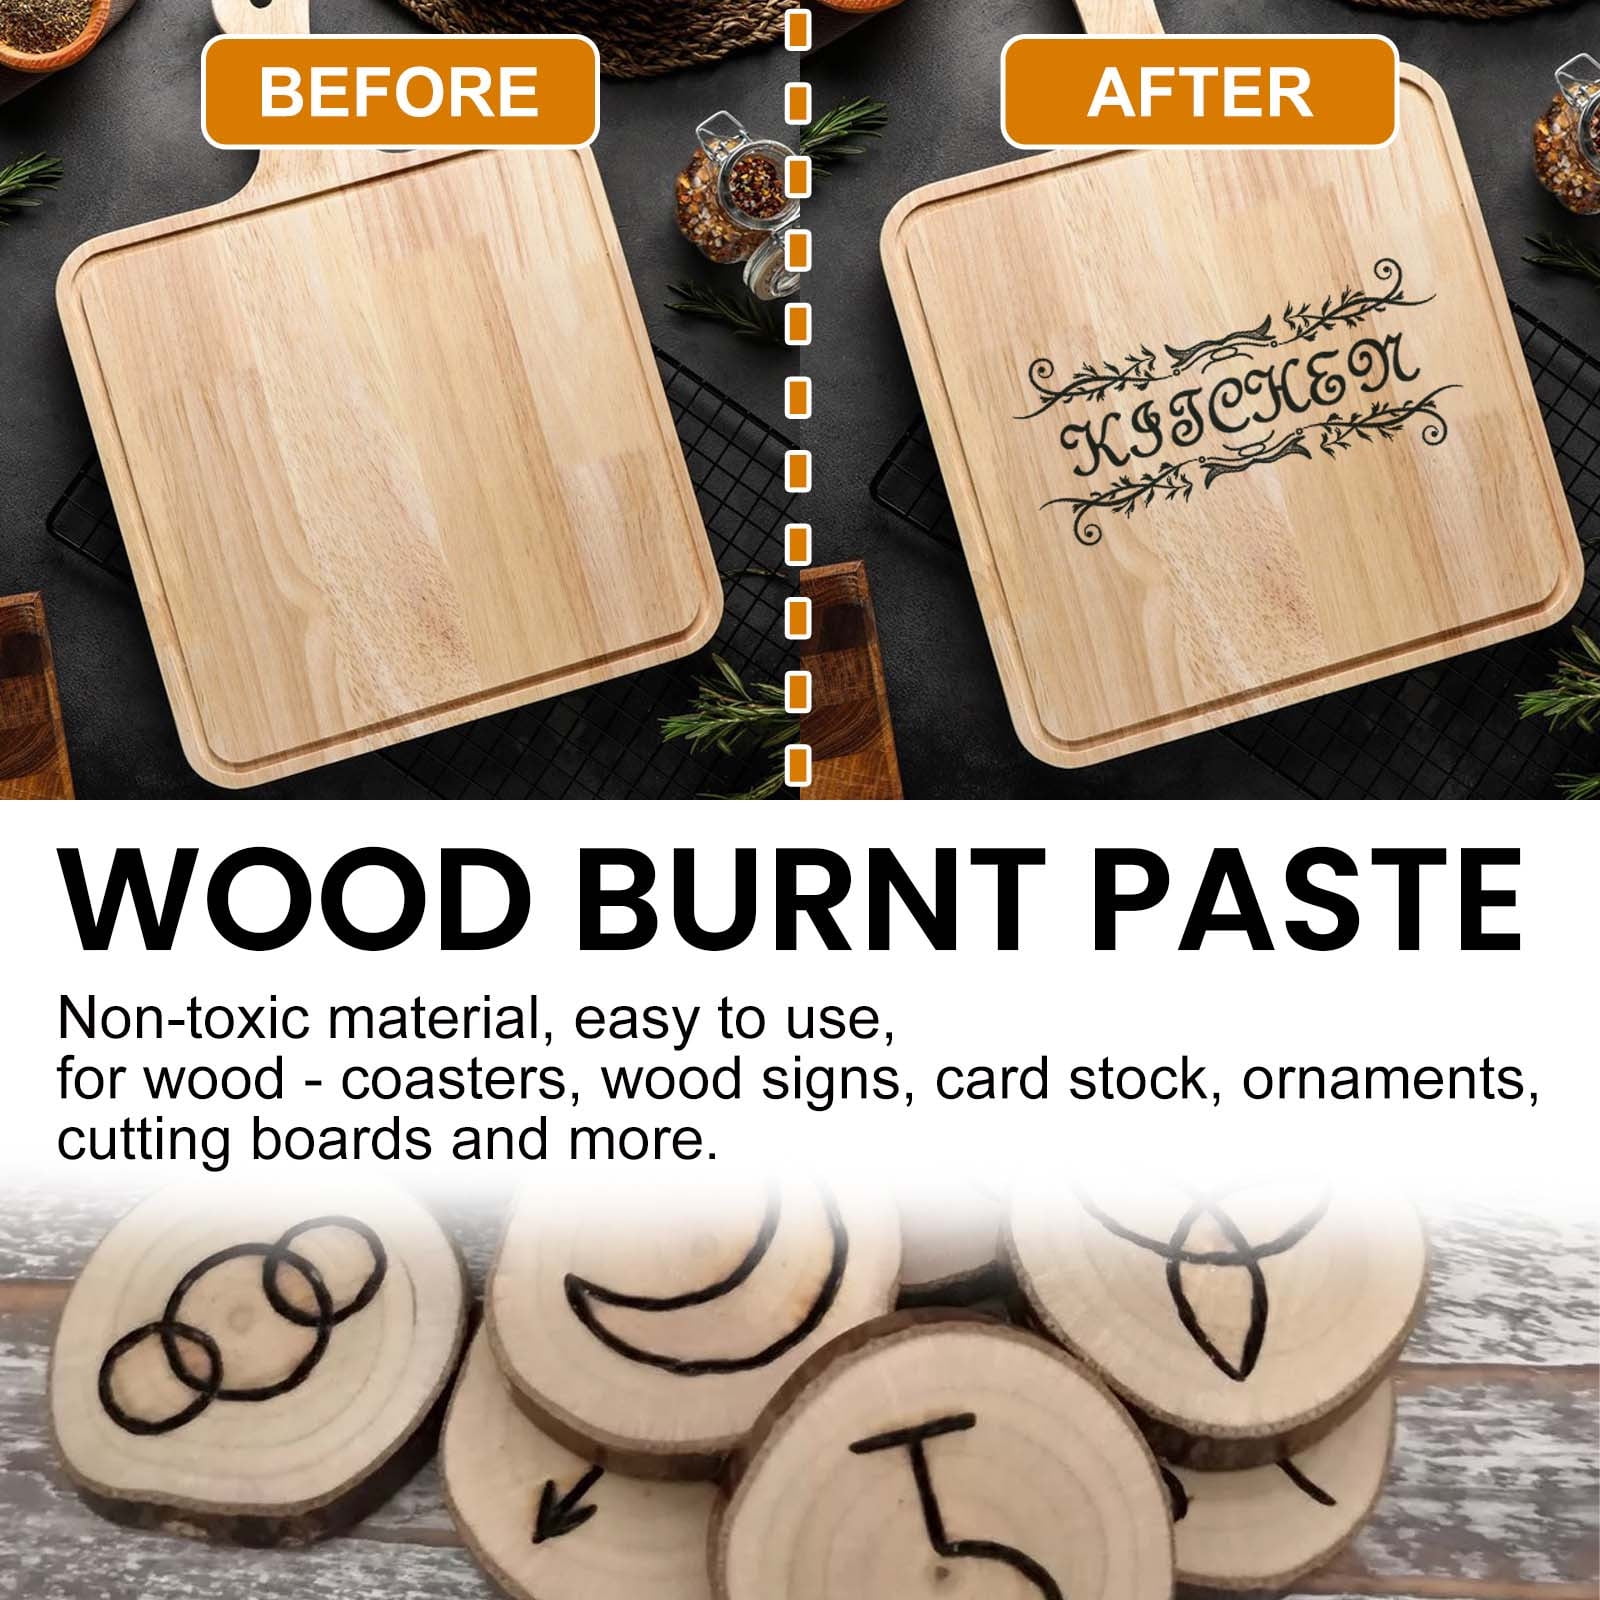 Easy to wood burn 🔥 with Torch Paste! #woodburn